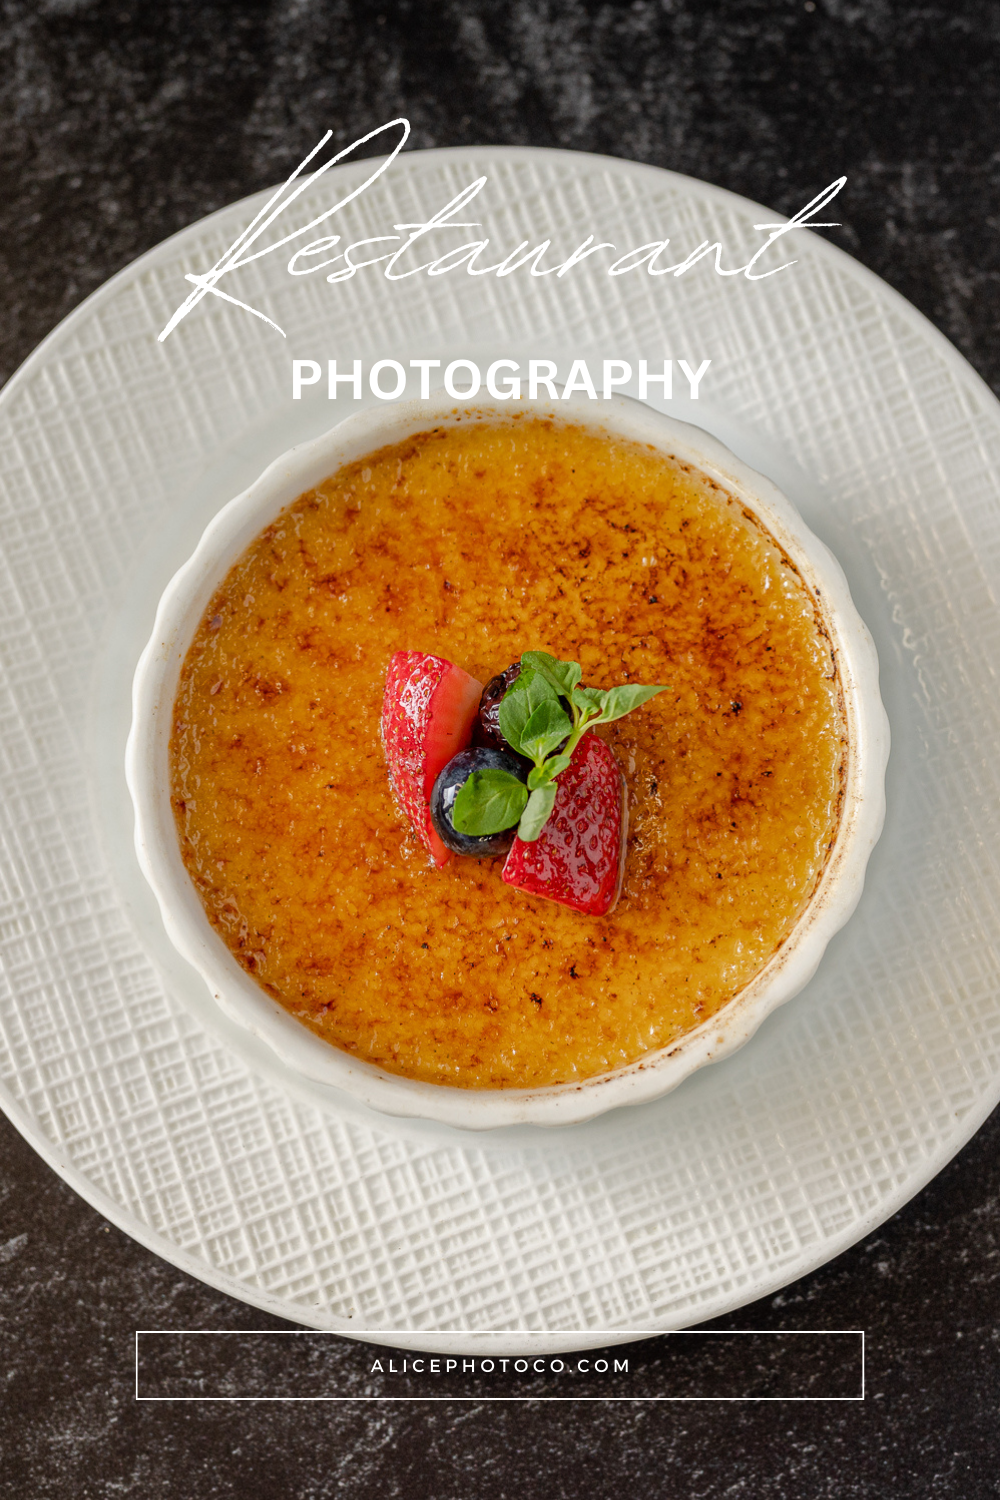 Restaurant Food Photography taken by Commercial Photographer near me